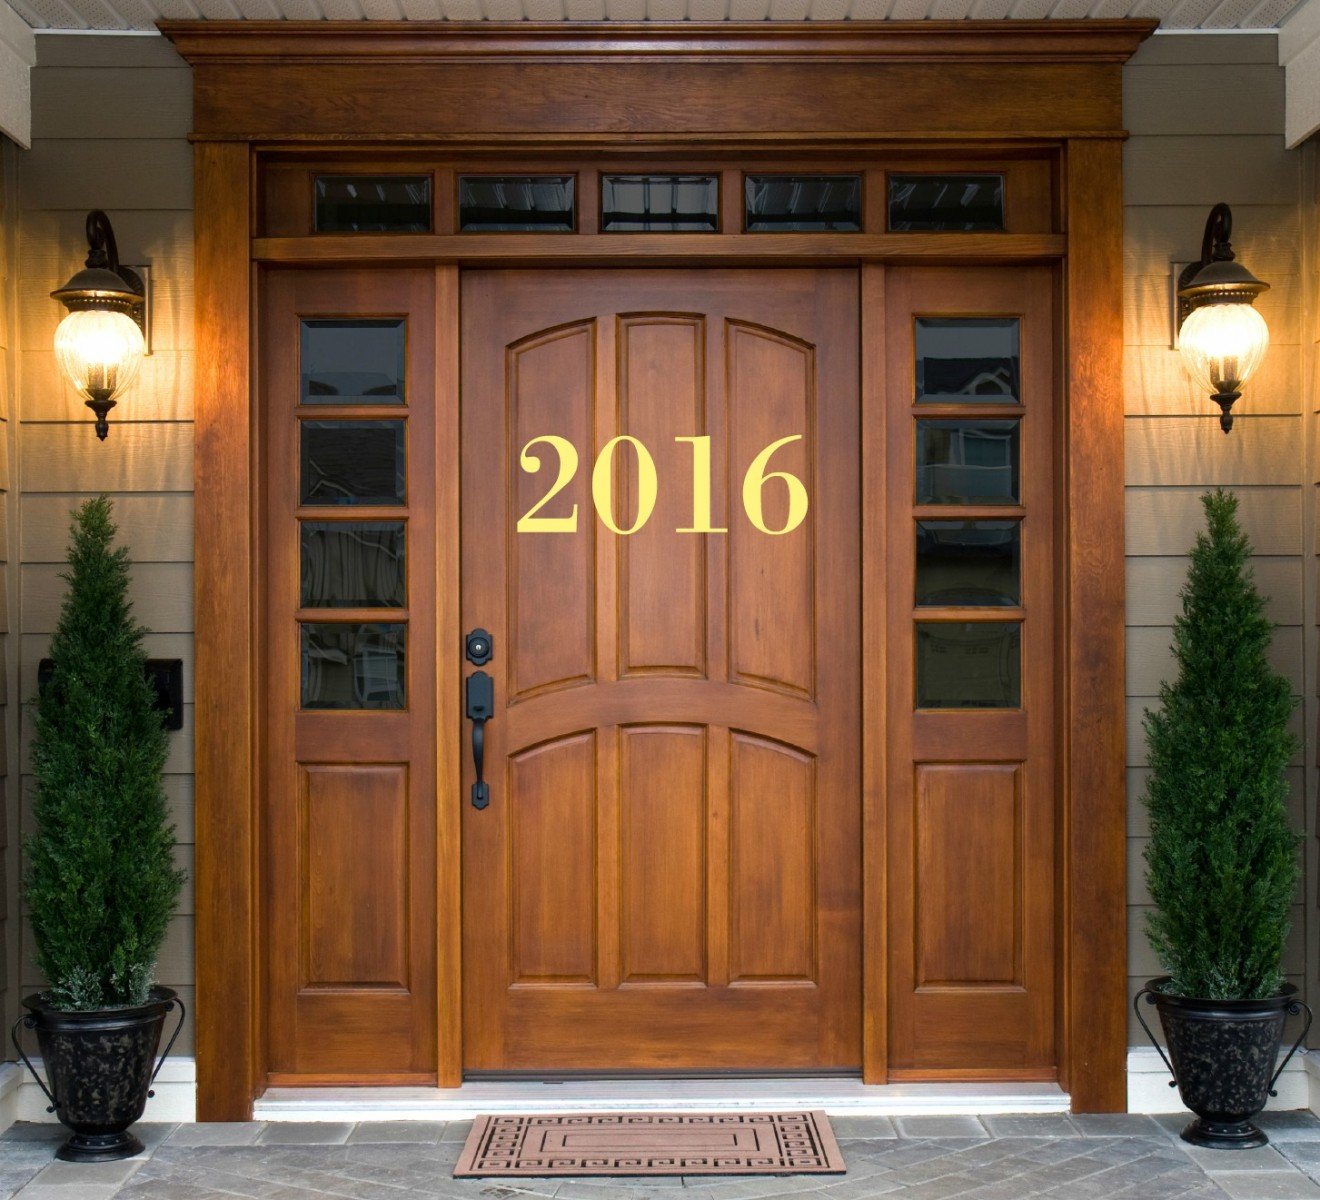 A wooden front door with the number 2016 on it, representing a New Year aesthetic.